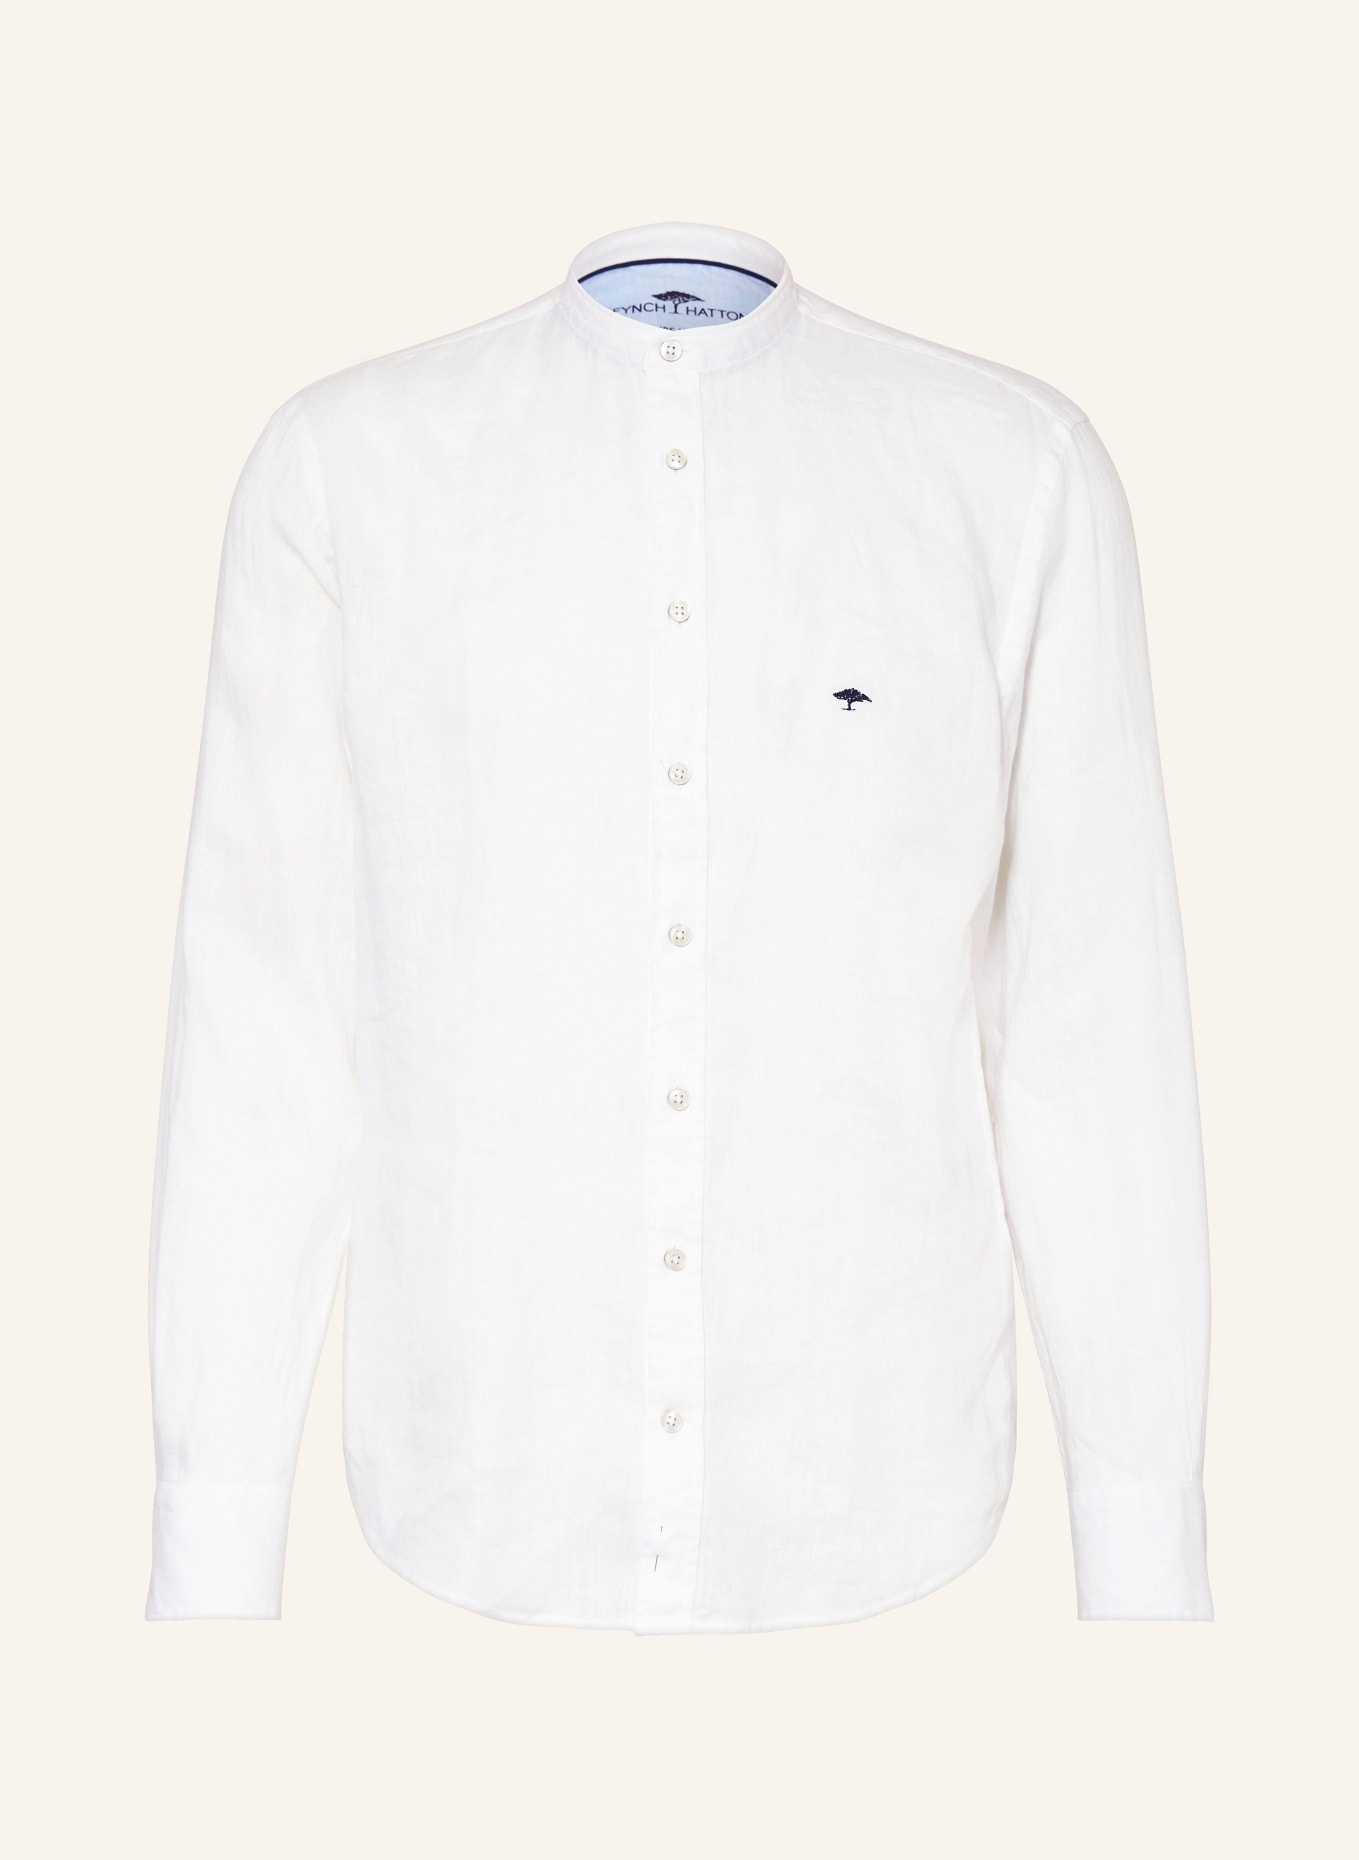 FYNCH-HATTON Linen shirt regular fit with stand-up collar, Color: WHITE (Image 1)